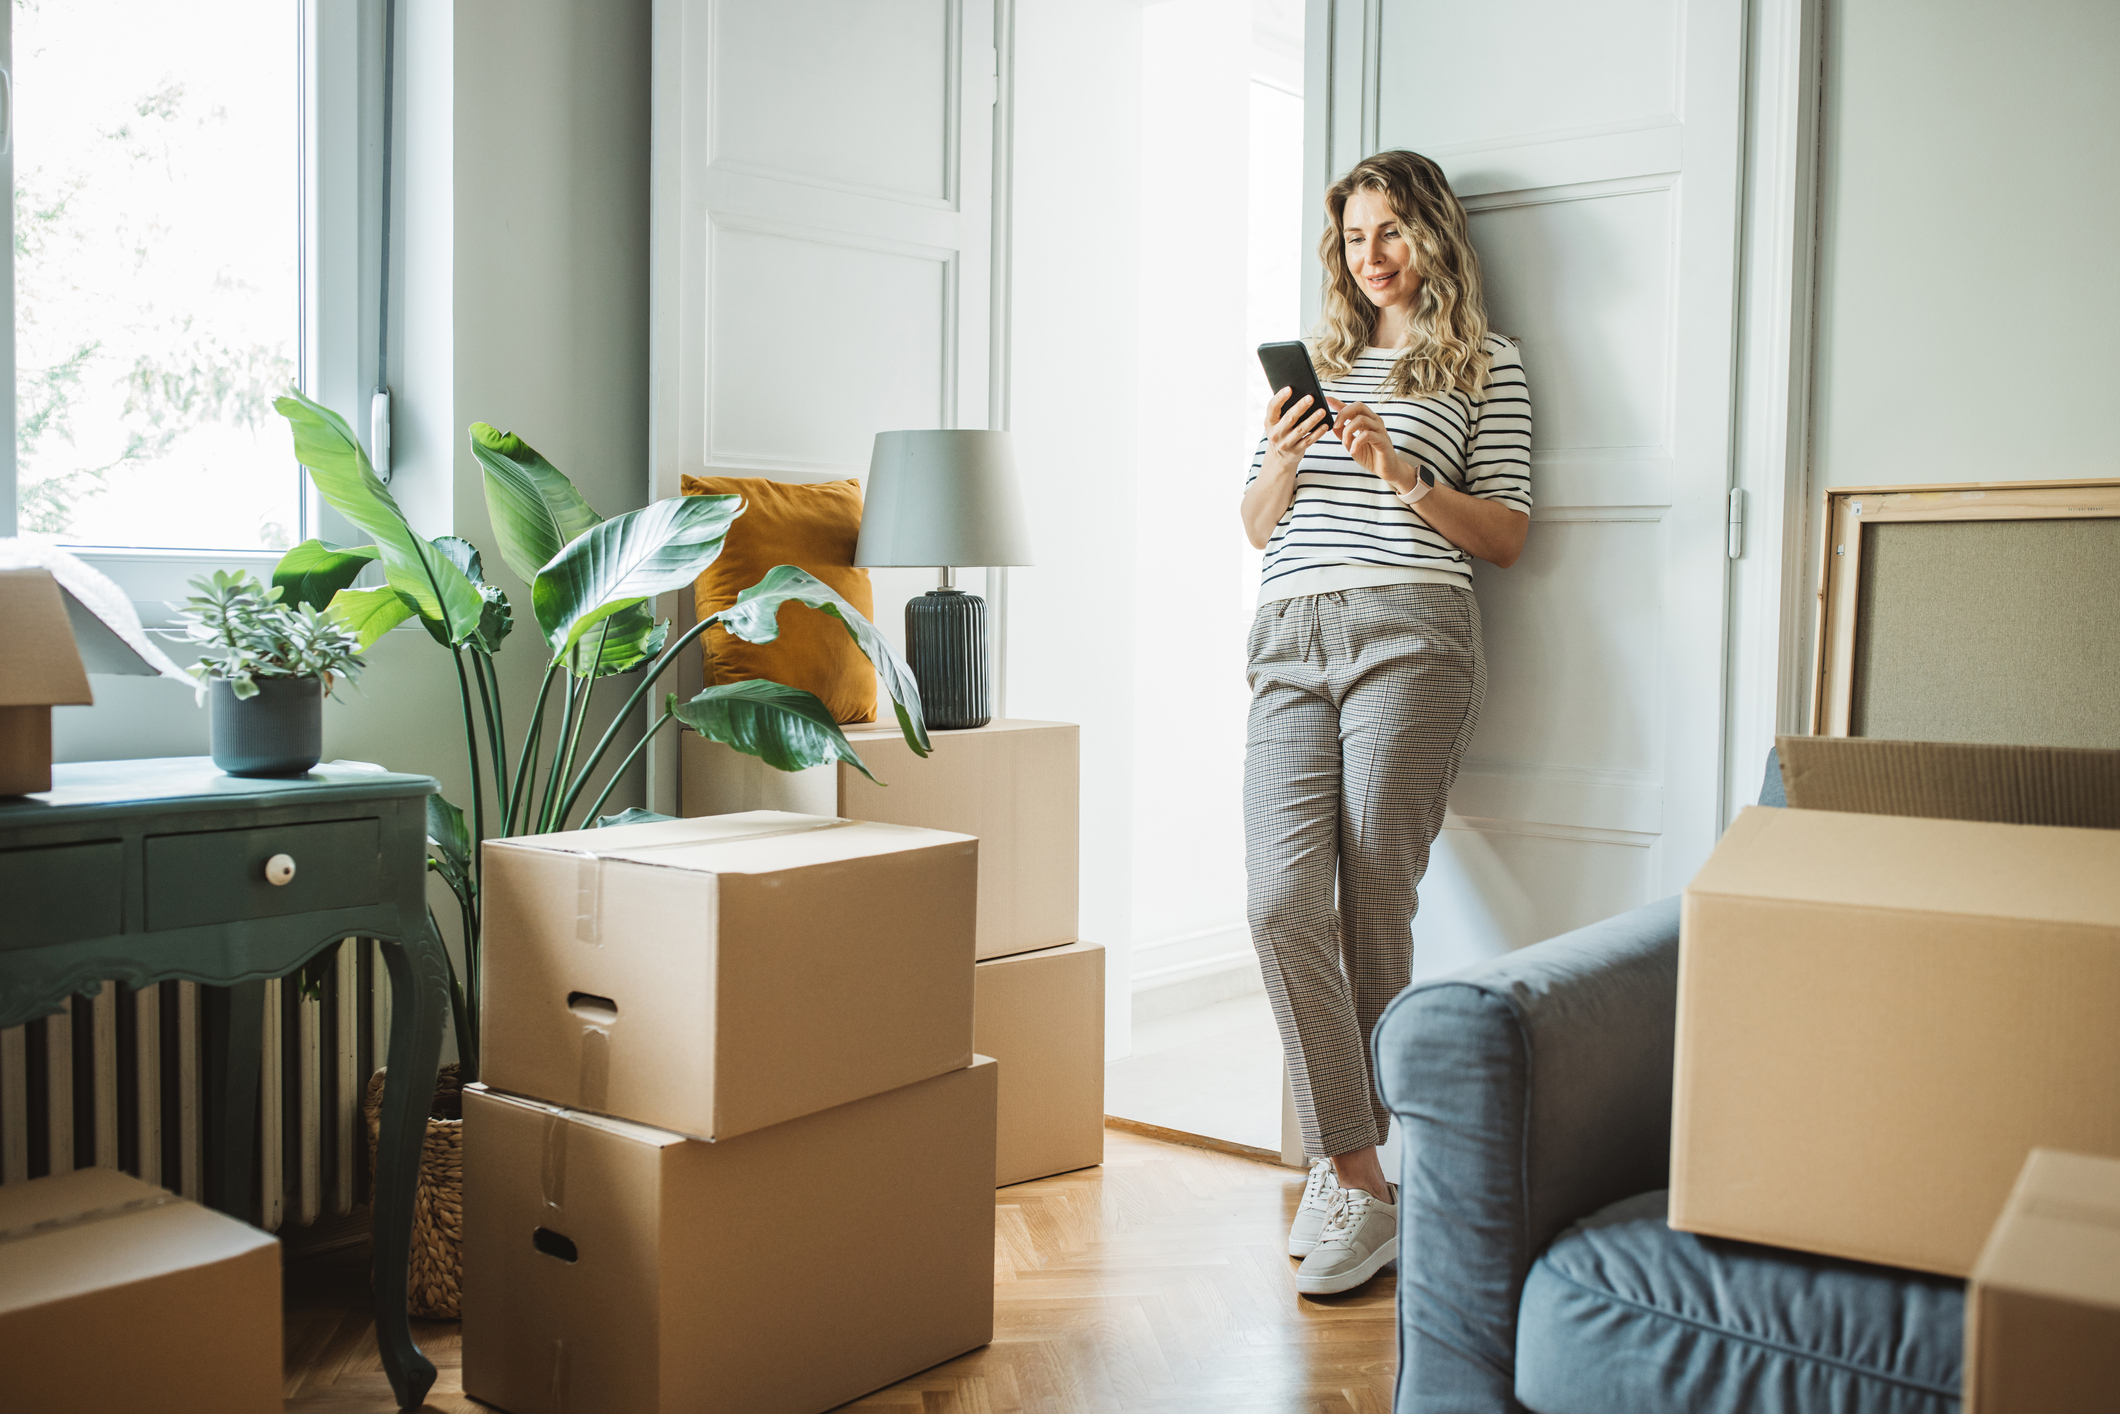 A smiling middle-aged woman is on her smartphone while surrounded by moving boxes and some furniture.